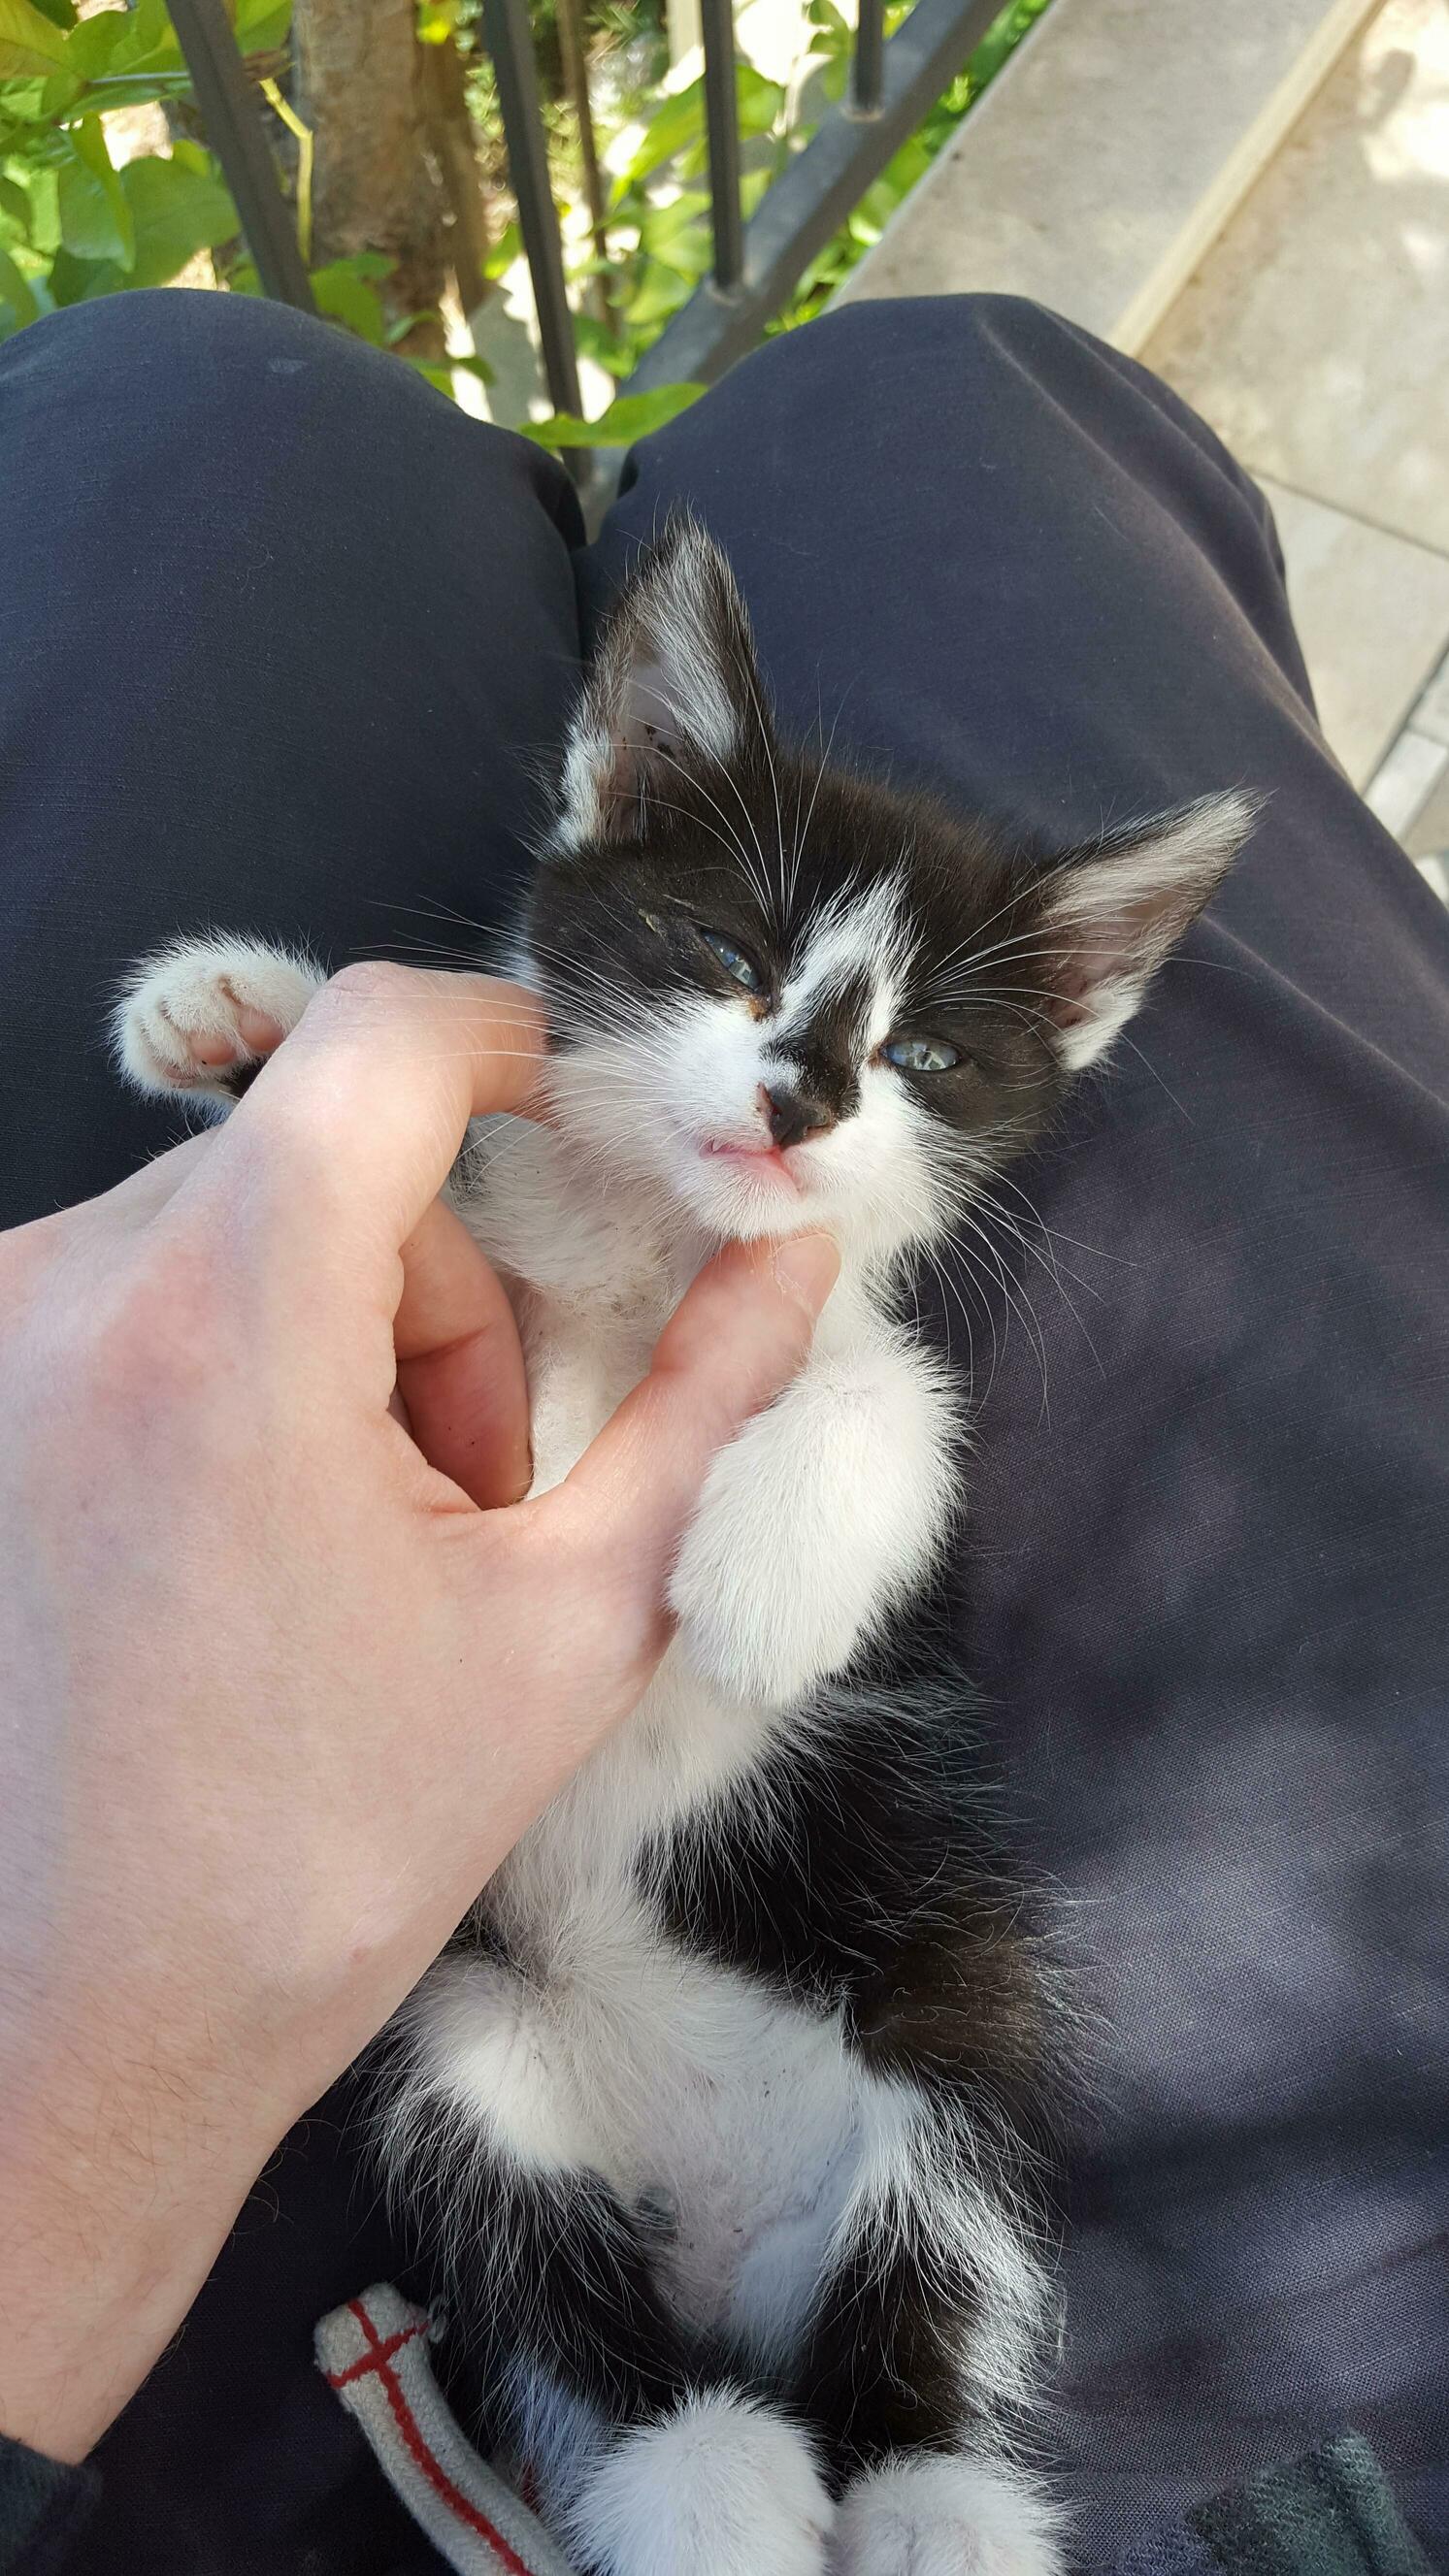 We found this abandoned kitten during our vacation. a neighbour promised to take care of her. hope shes fine